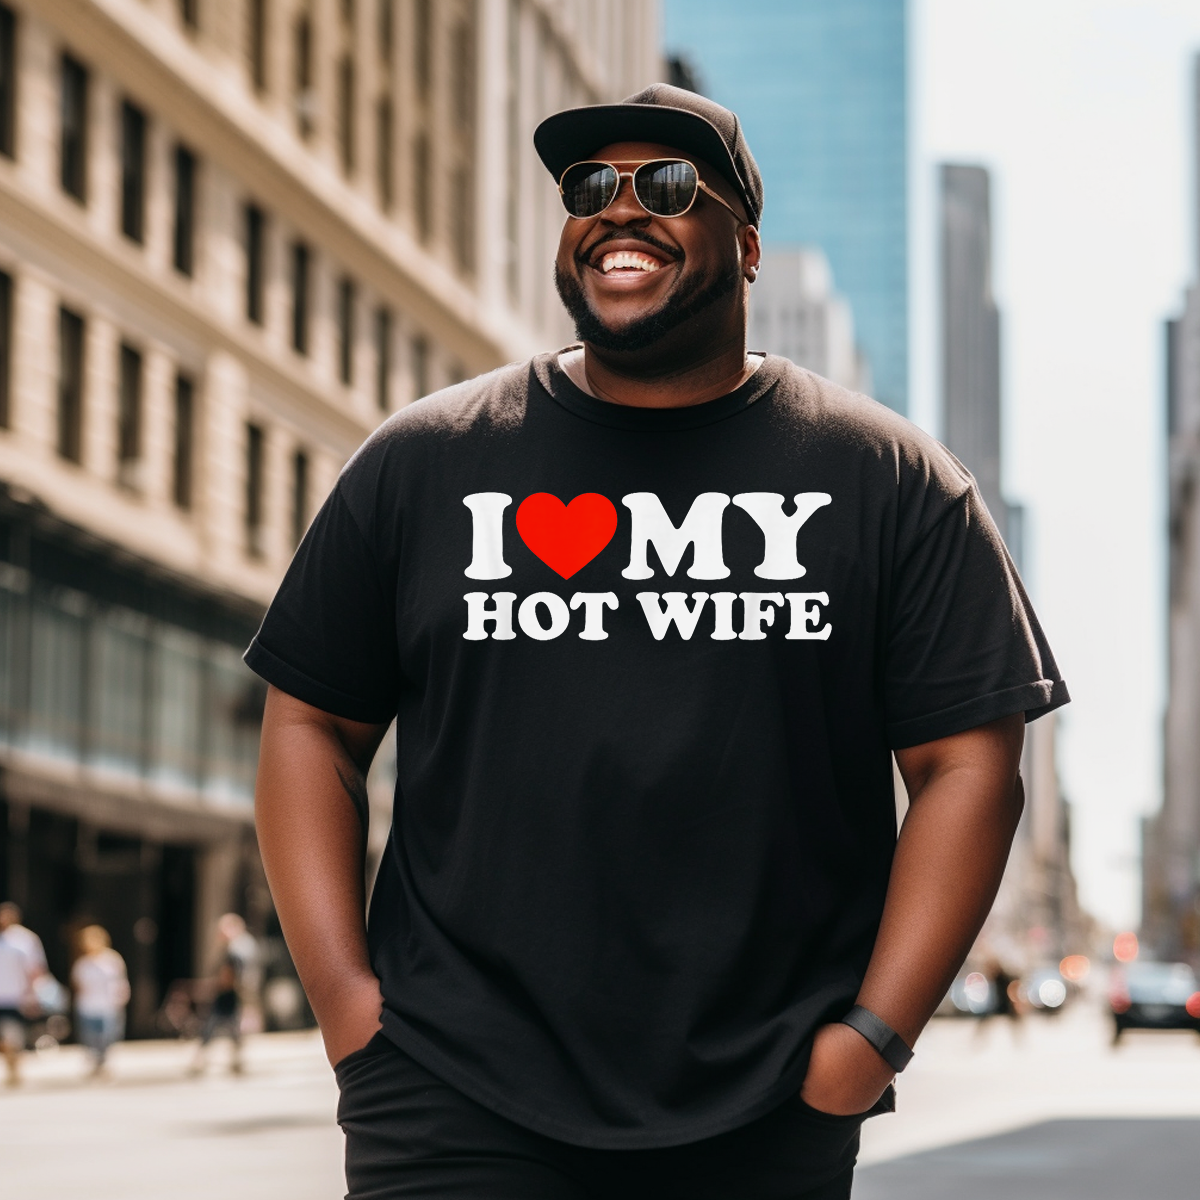 I Love My Hot Wife T-Shirt Valentines Day T-Shirt, Men Plus Size Oversize T-shirt for Big & Tall Man